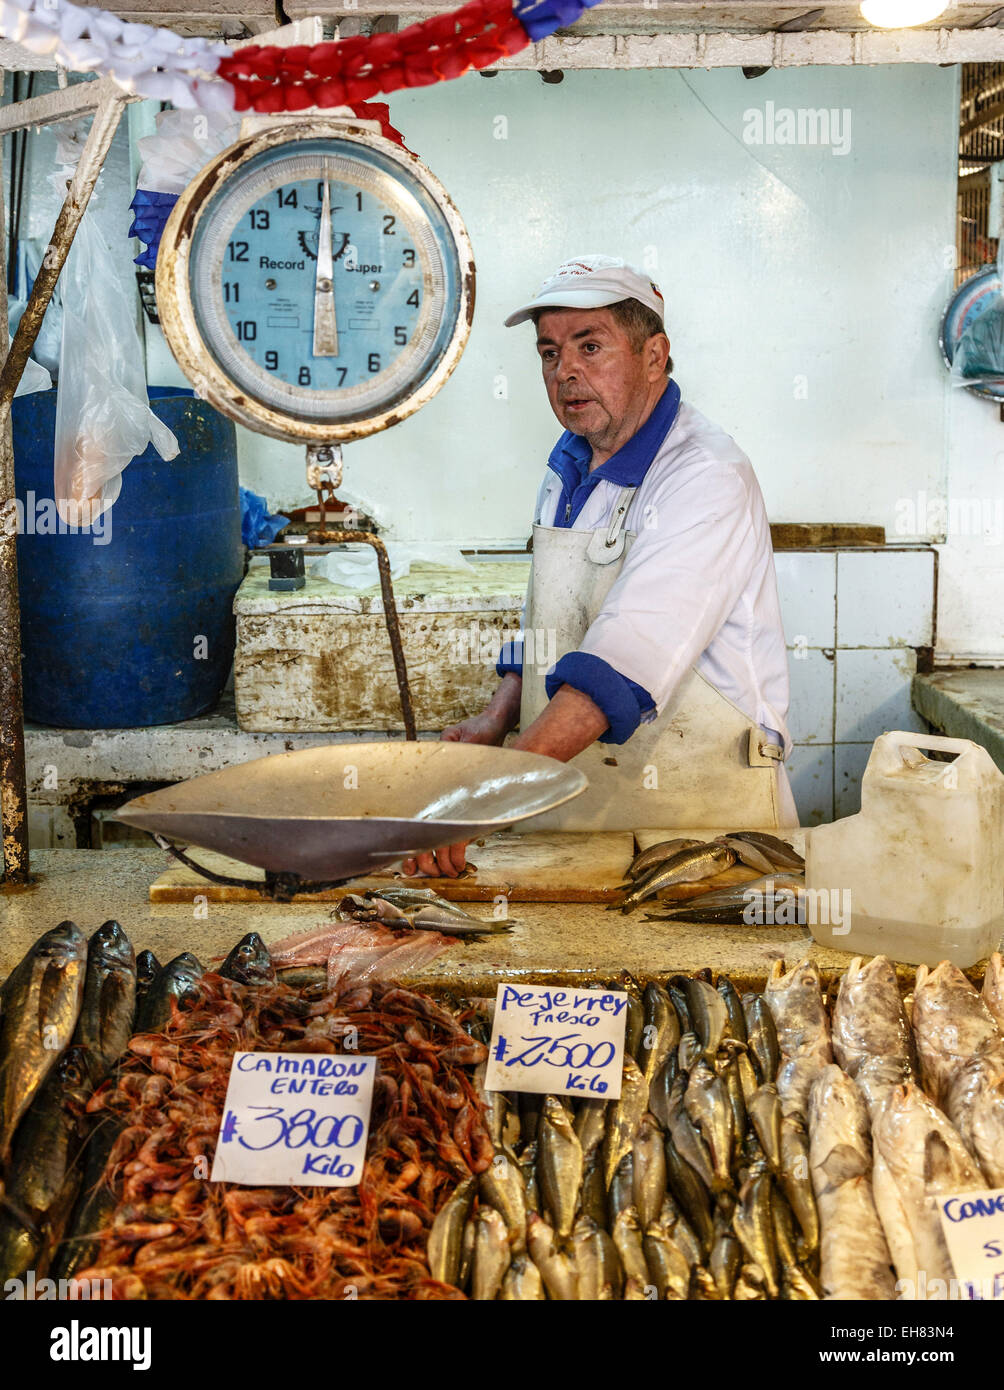 Fish and seafood stall at Mercado Central, Santiago, Chile, South America Stock Photo